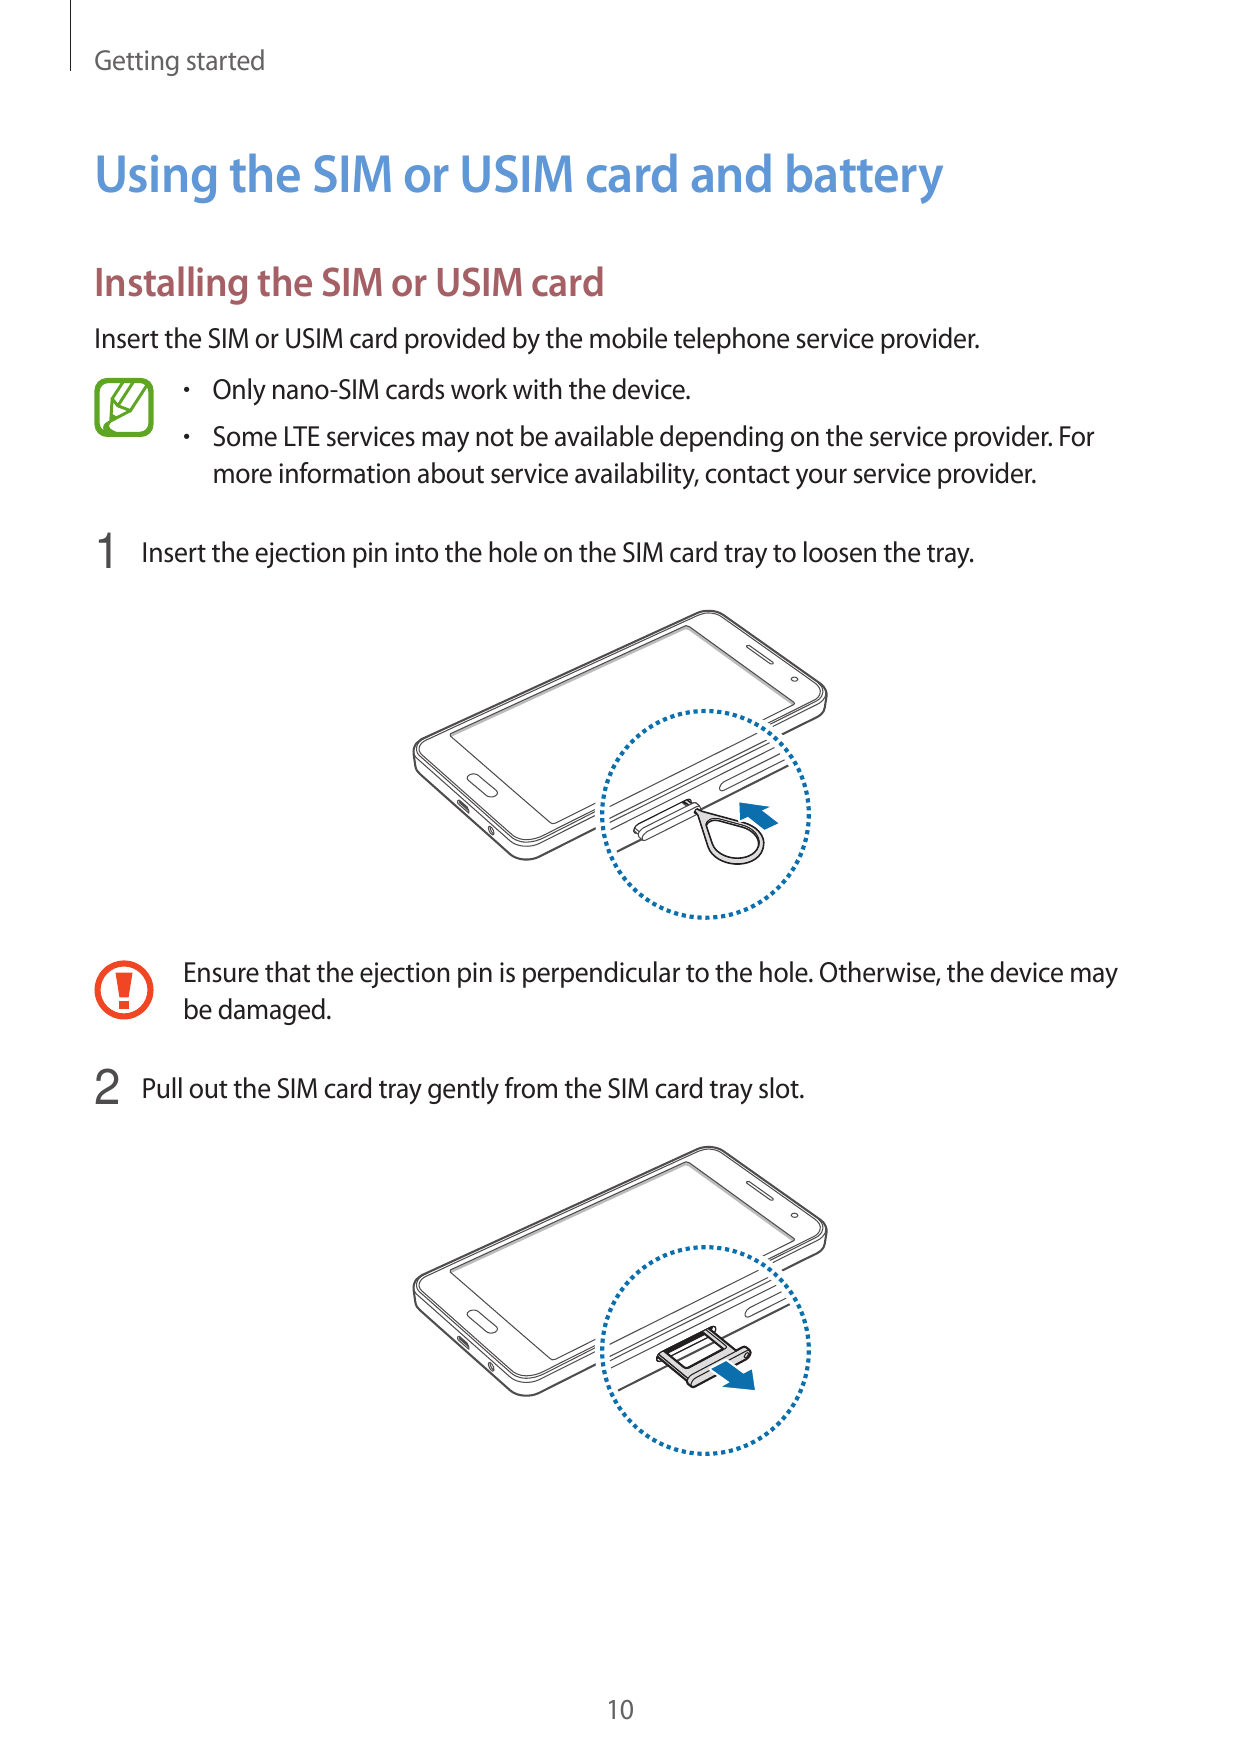 Getting startedUsing the SIM or USIM card and batteryInstalling the SIM or USIM cardInsert the SIM or USIM card provided by the 